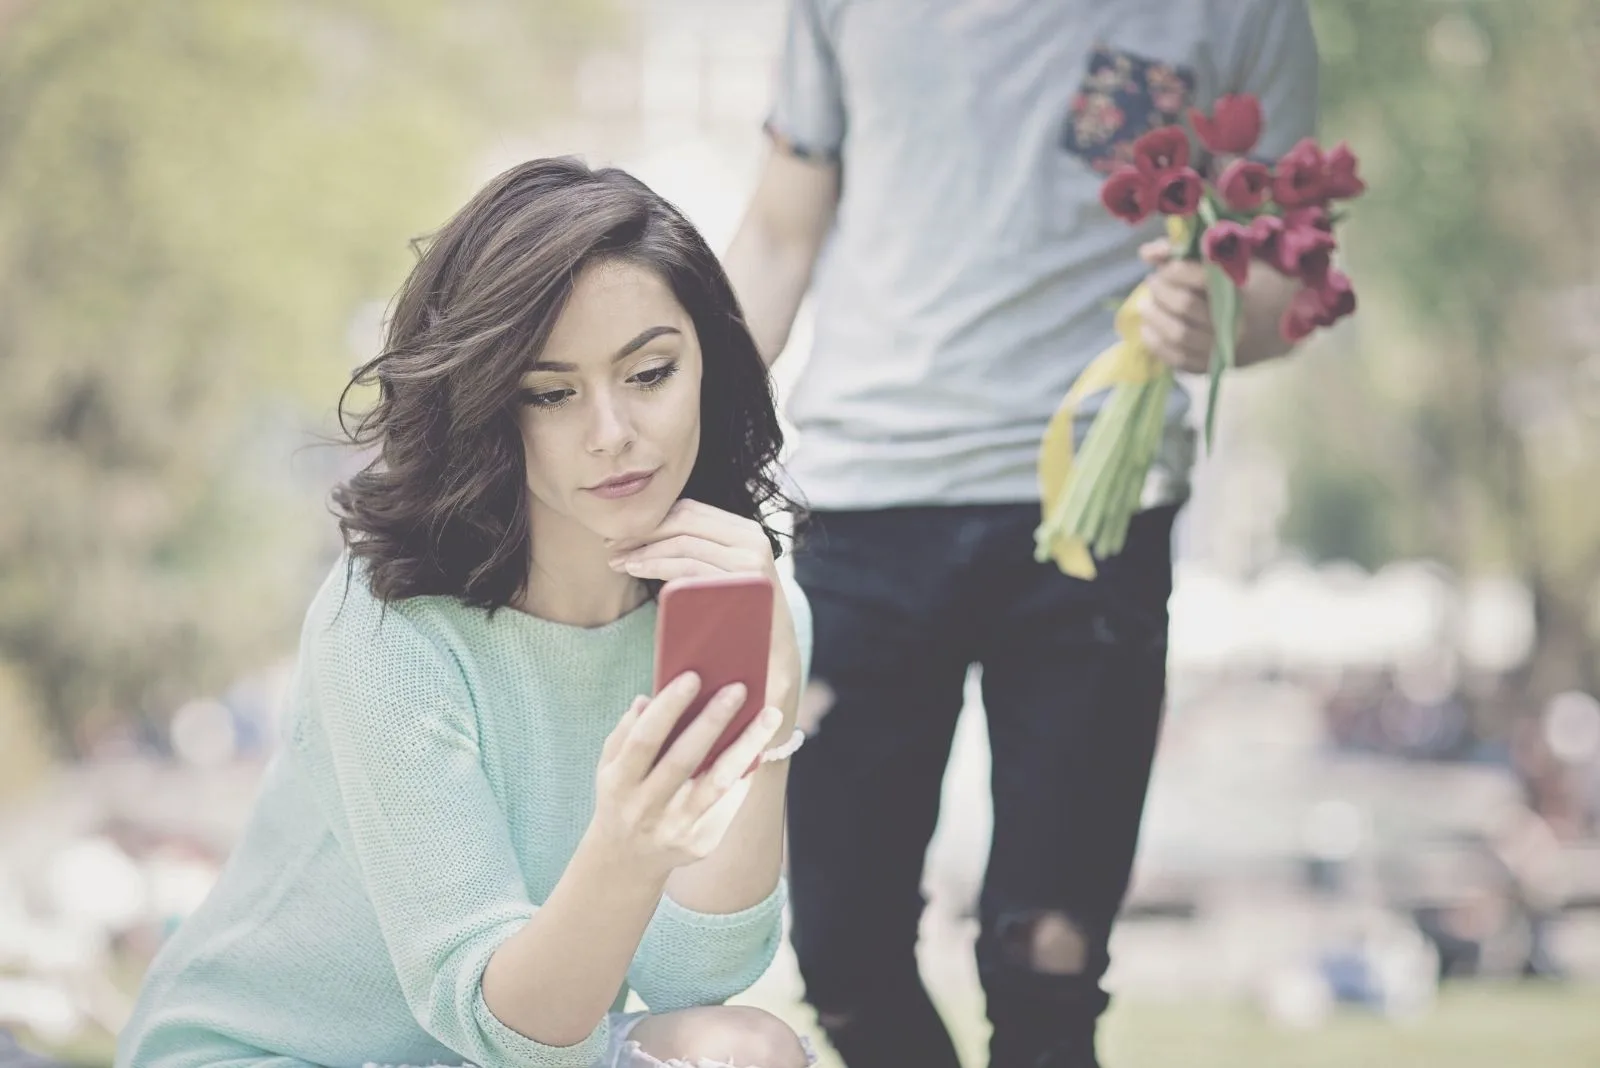 man is bringing flowers to a woman sitting in the park looking at her smartphone